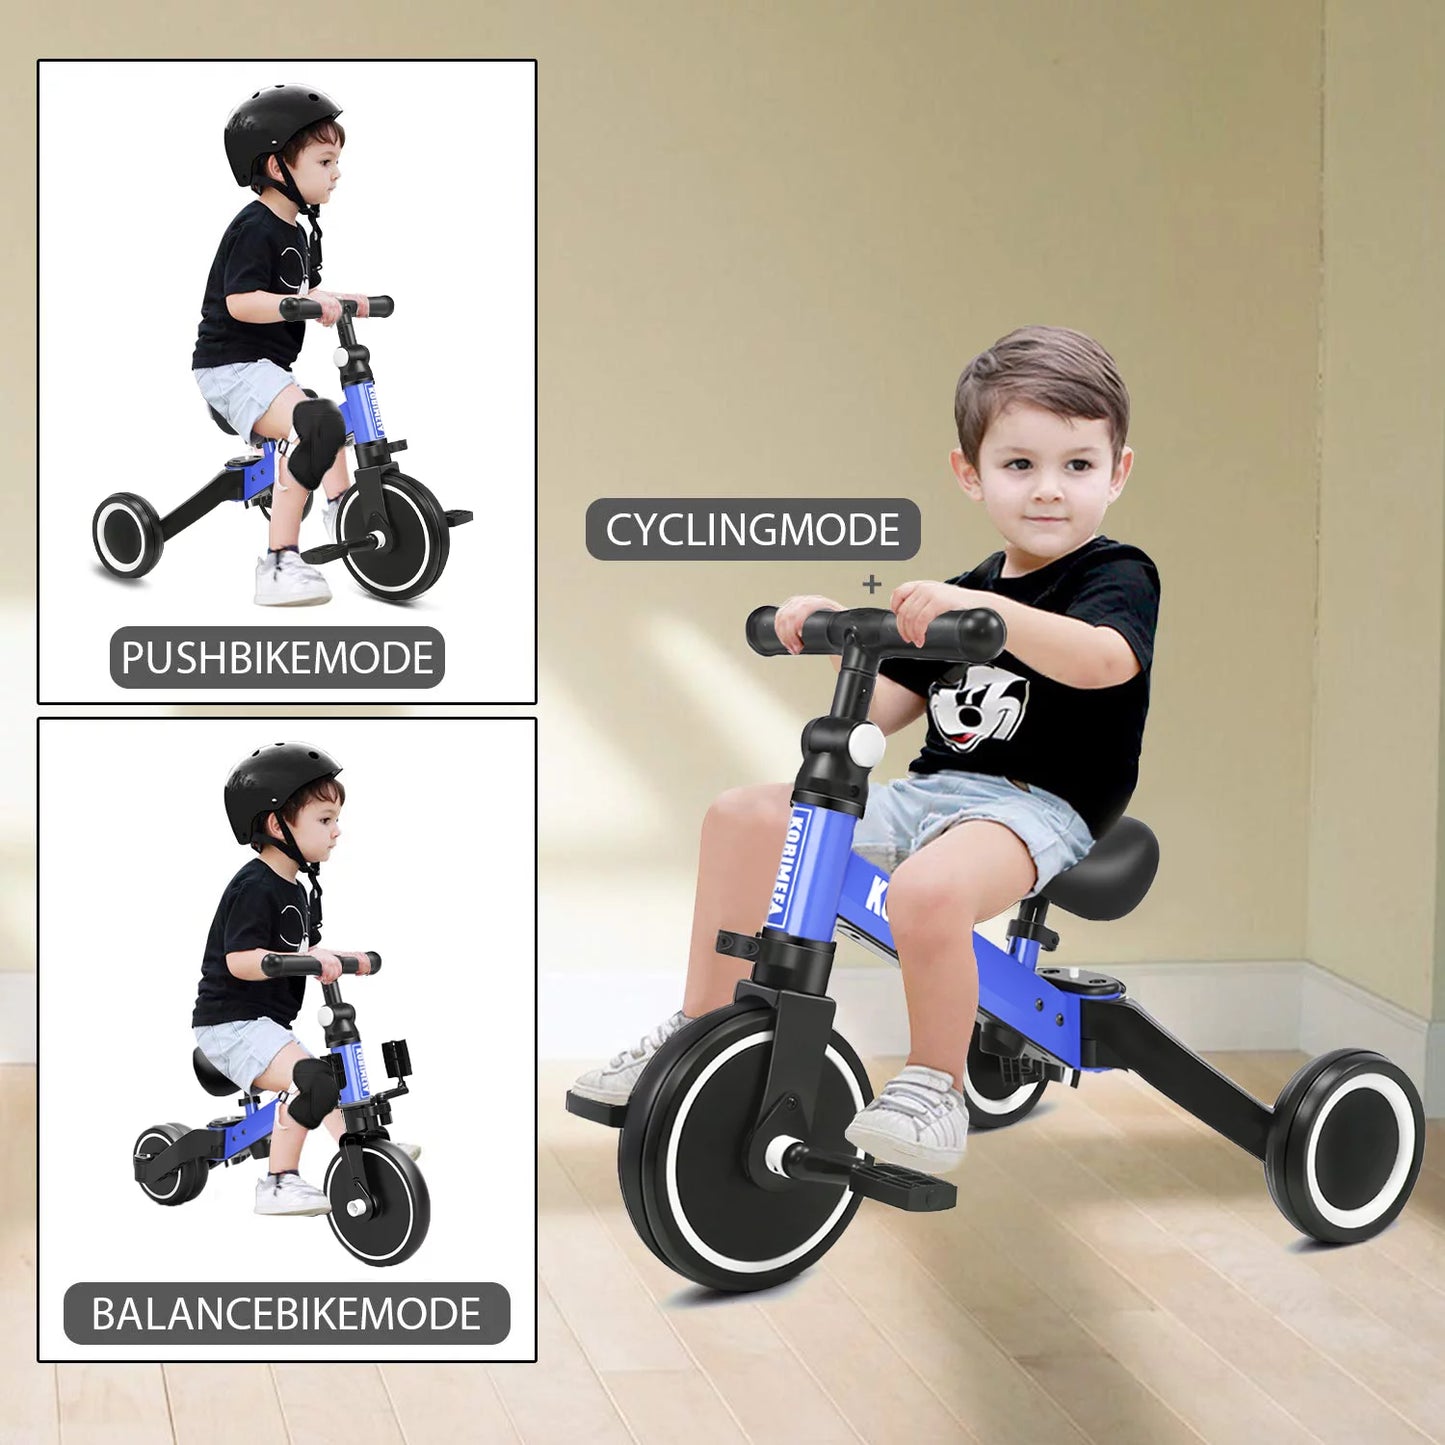 3 in 1 Kids Tricycle for 1-4 year olds, Toddler Bike Kids Trike for Balance Training, Baby Bike for Boy Girl